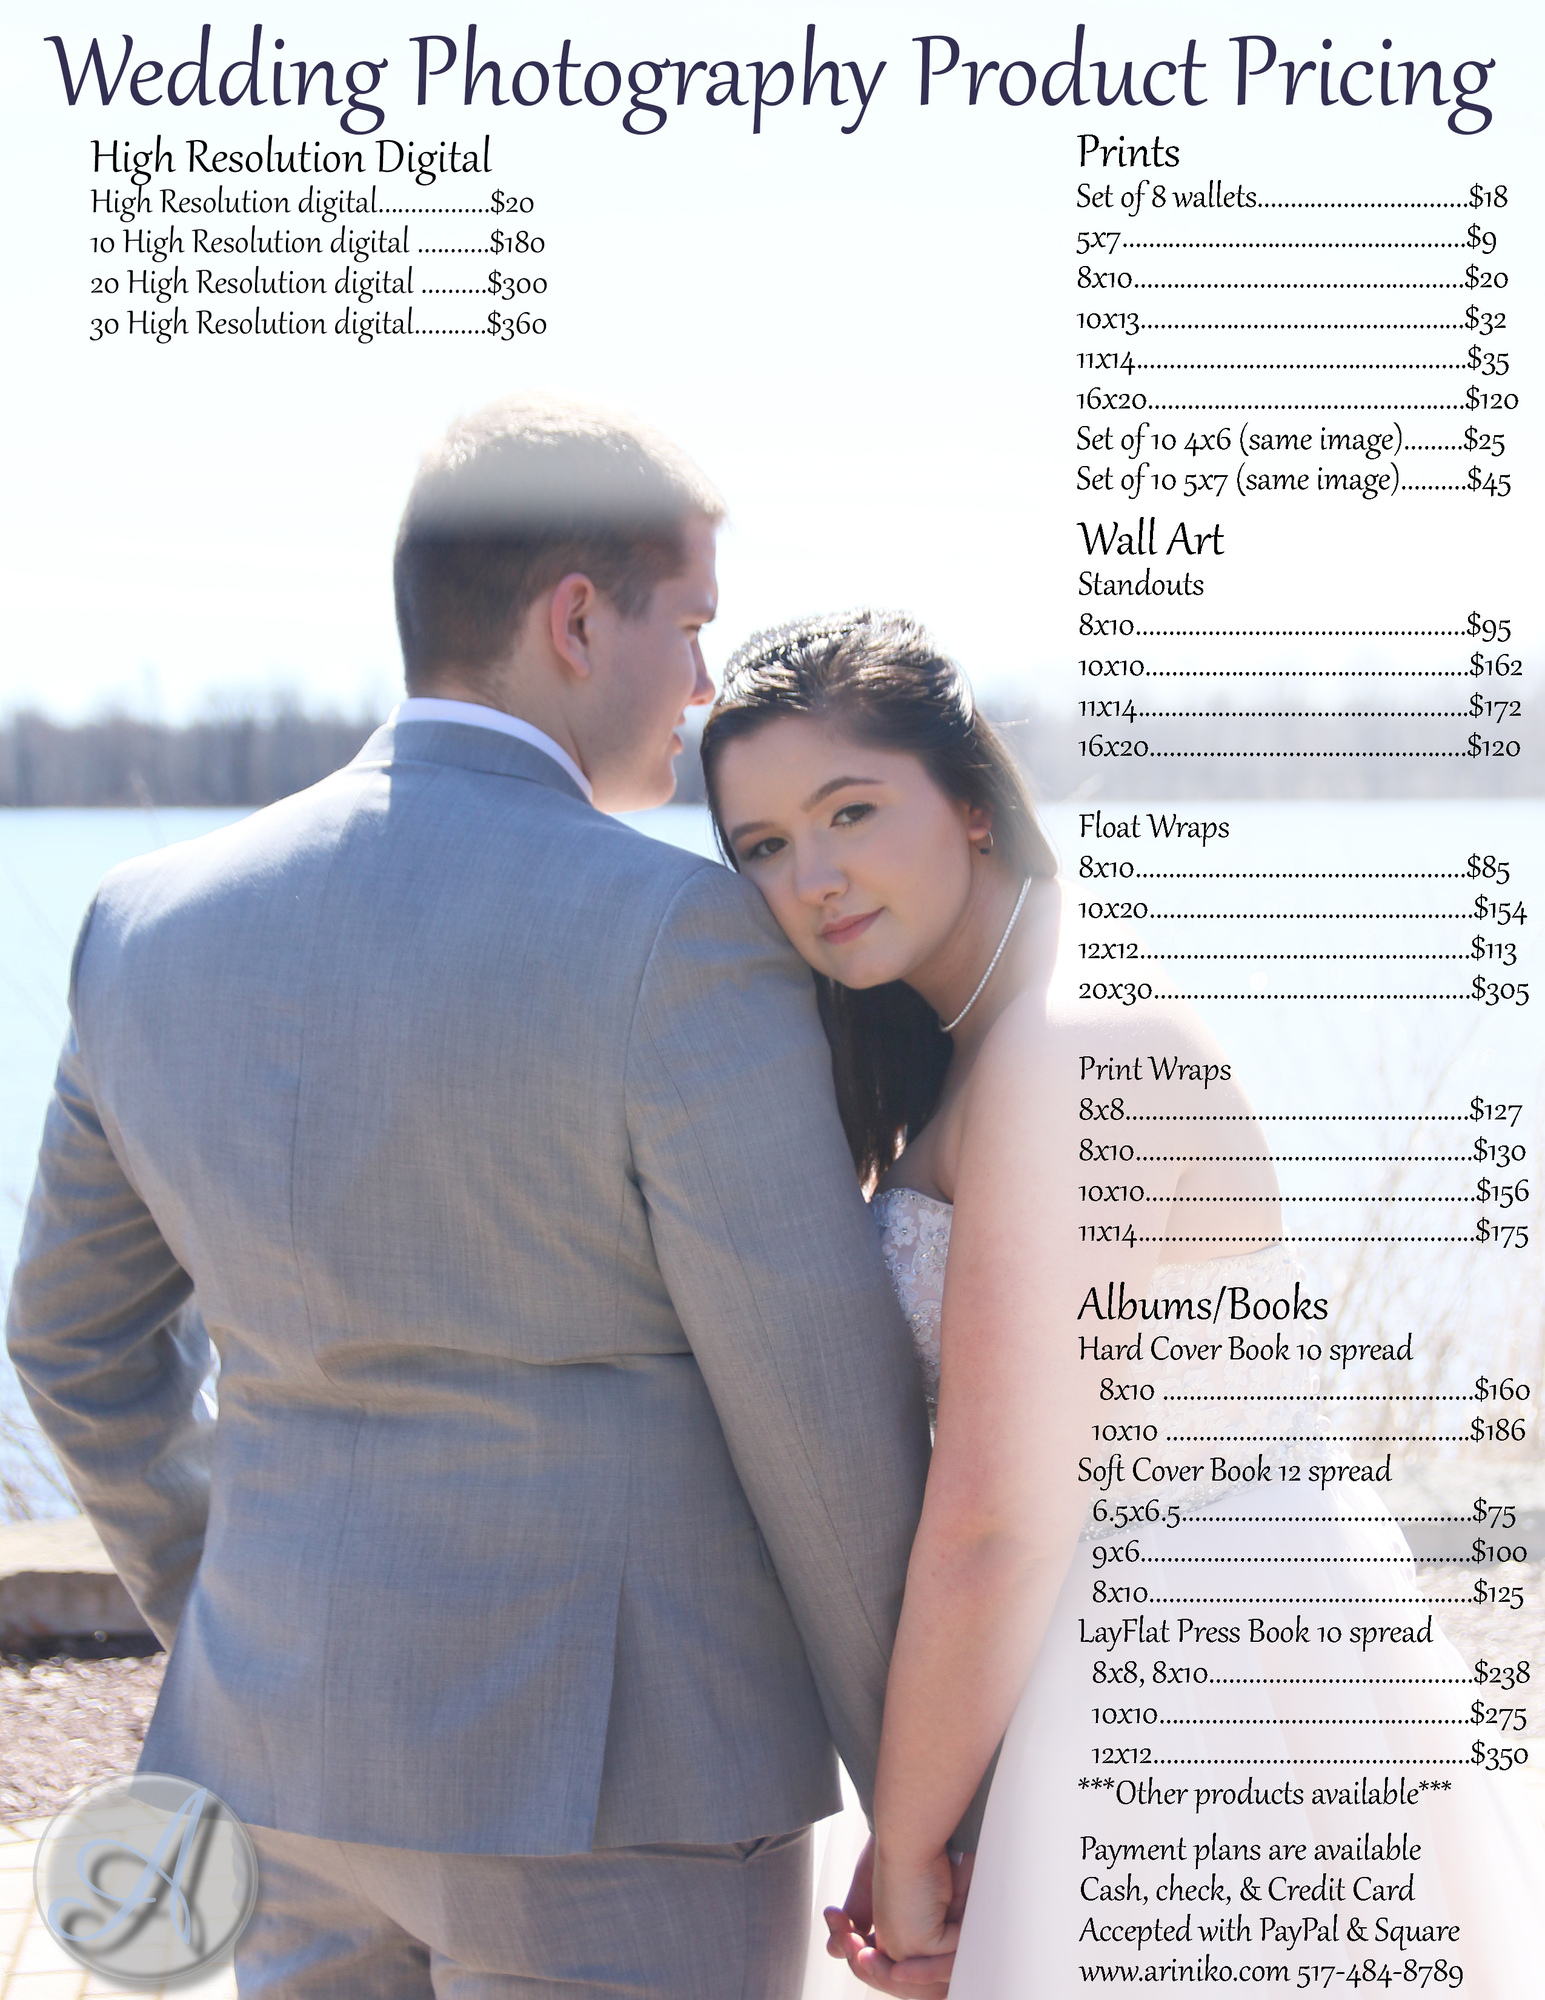 Wedding & Engagement Product Pricing Guide. A newly married couple pose near the lake. The groom is wearing a grey suit and has 